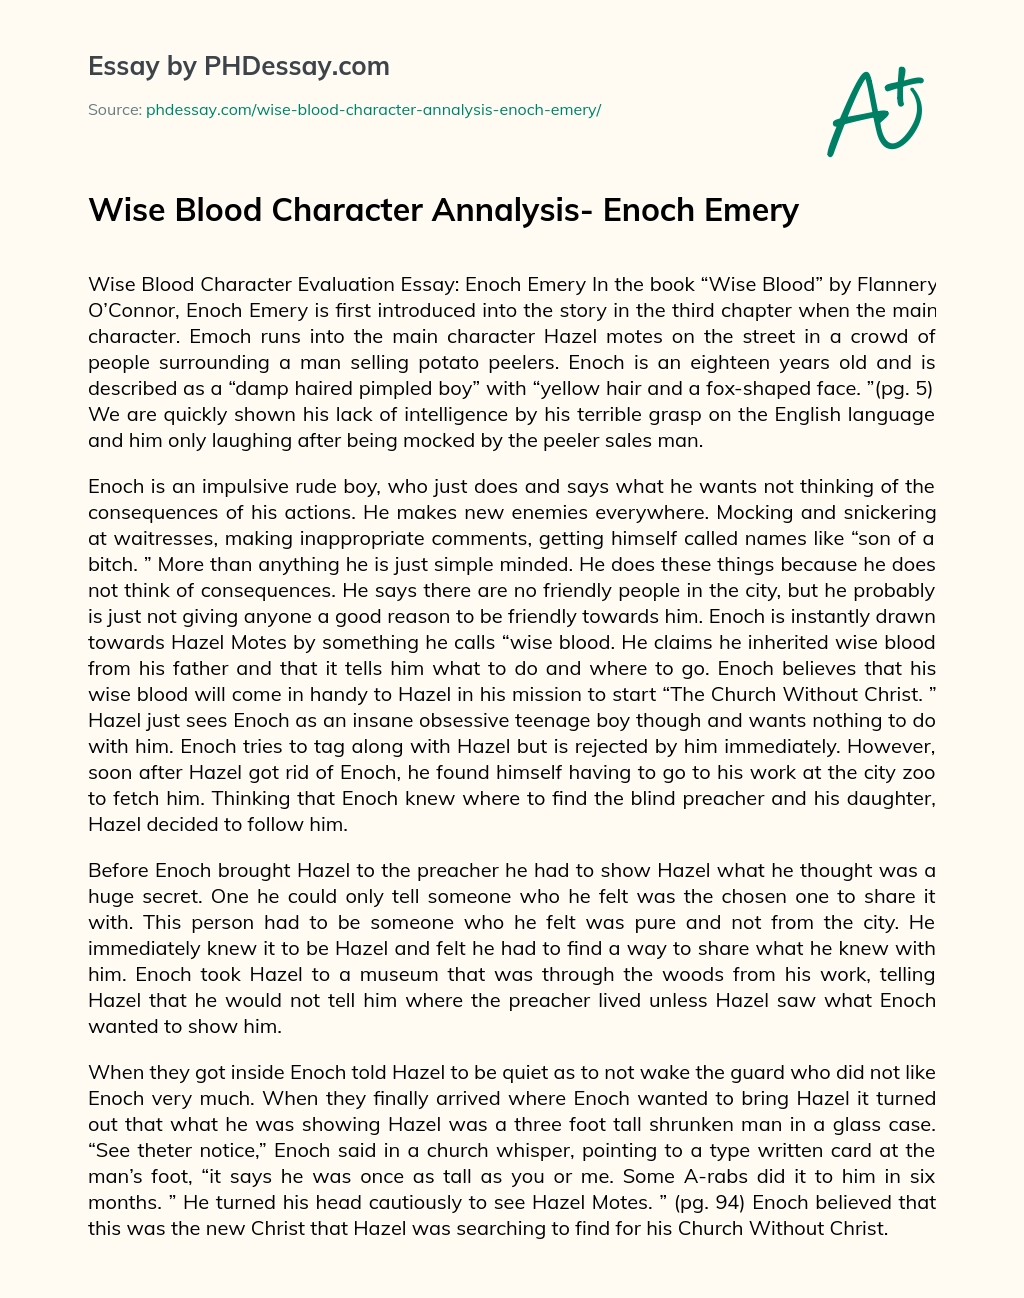 Wise Blood Character Annalysis- Enoch Emery essay